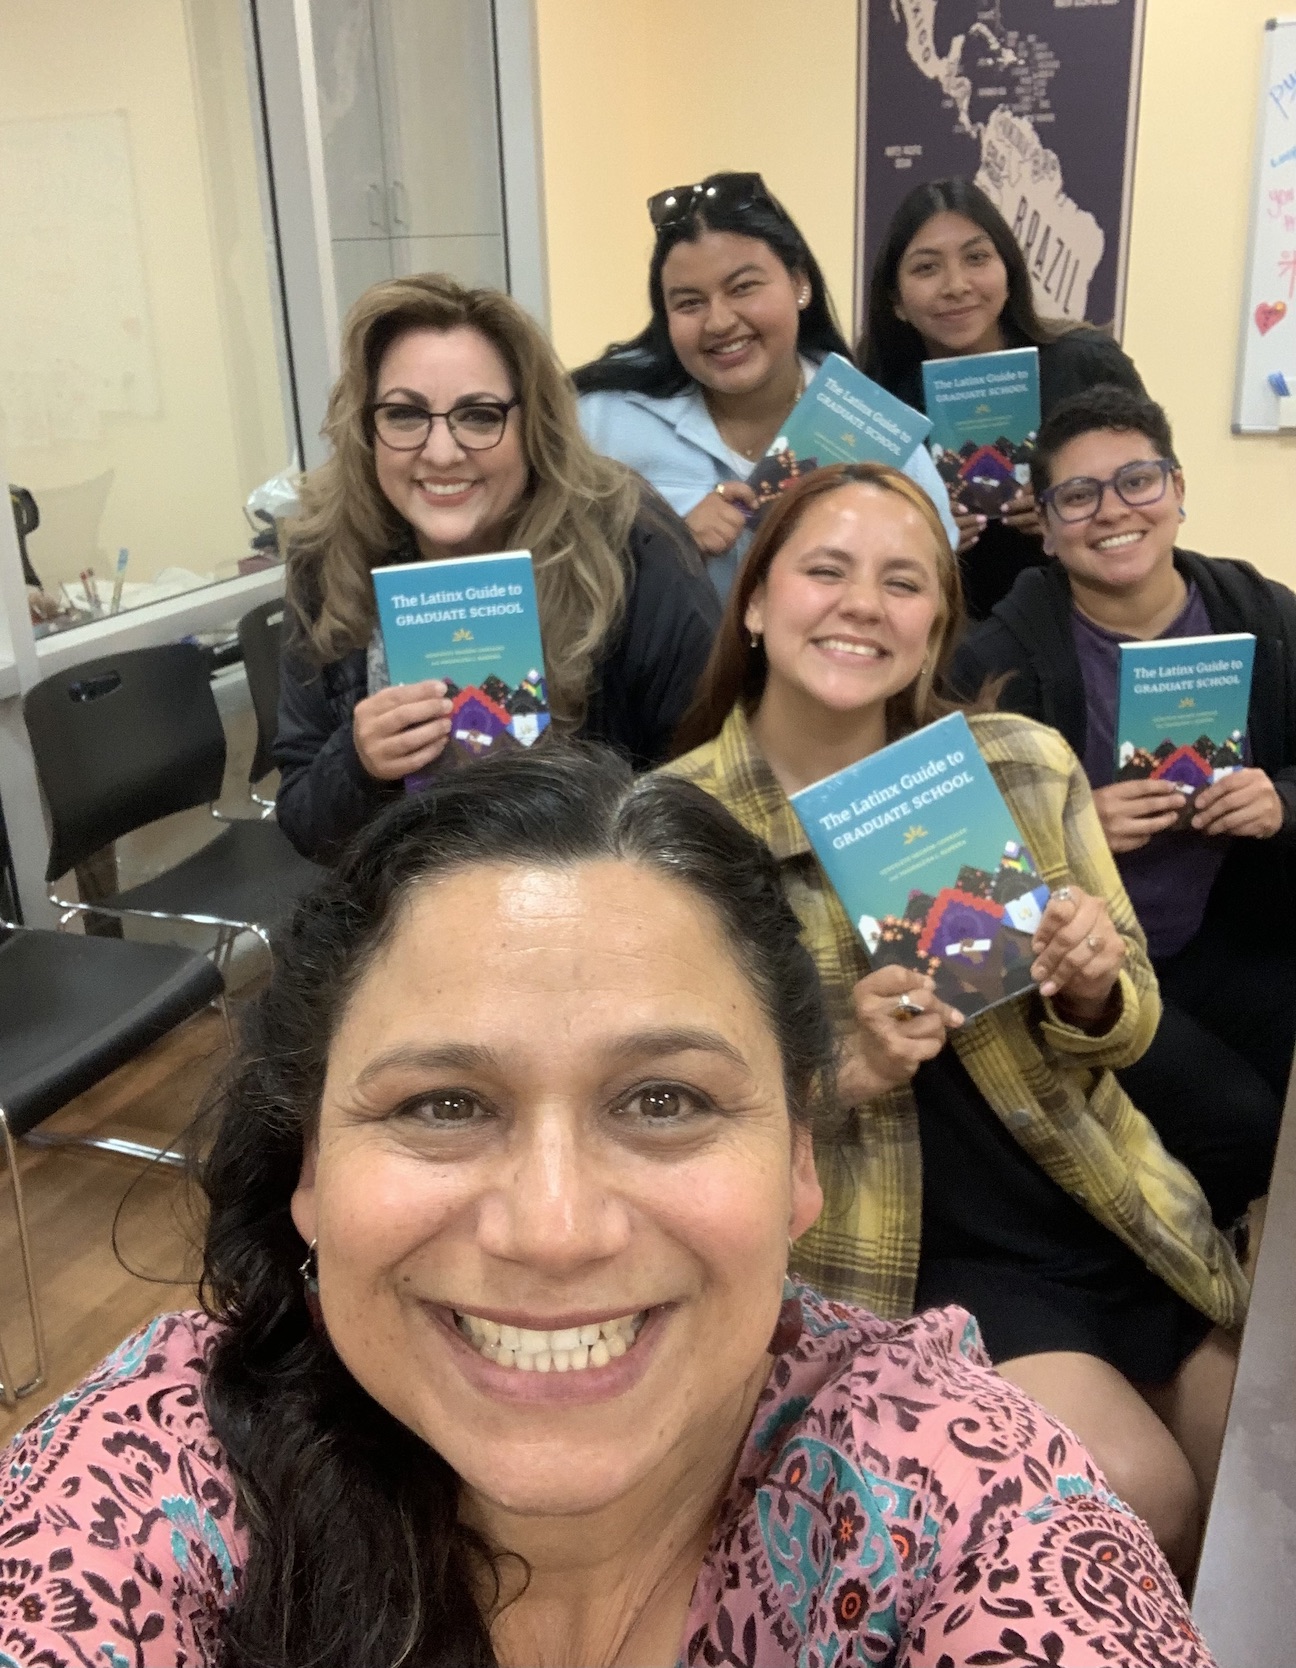 Irene Lara with students, holding Latinx Guide to Graduate School book.